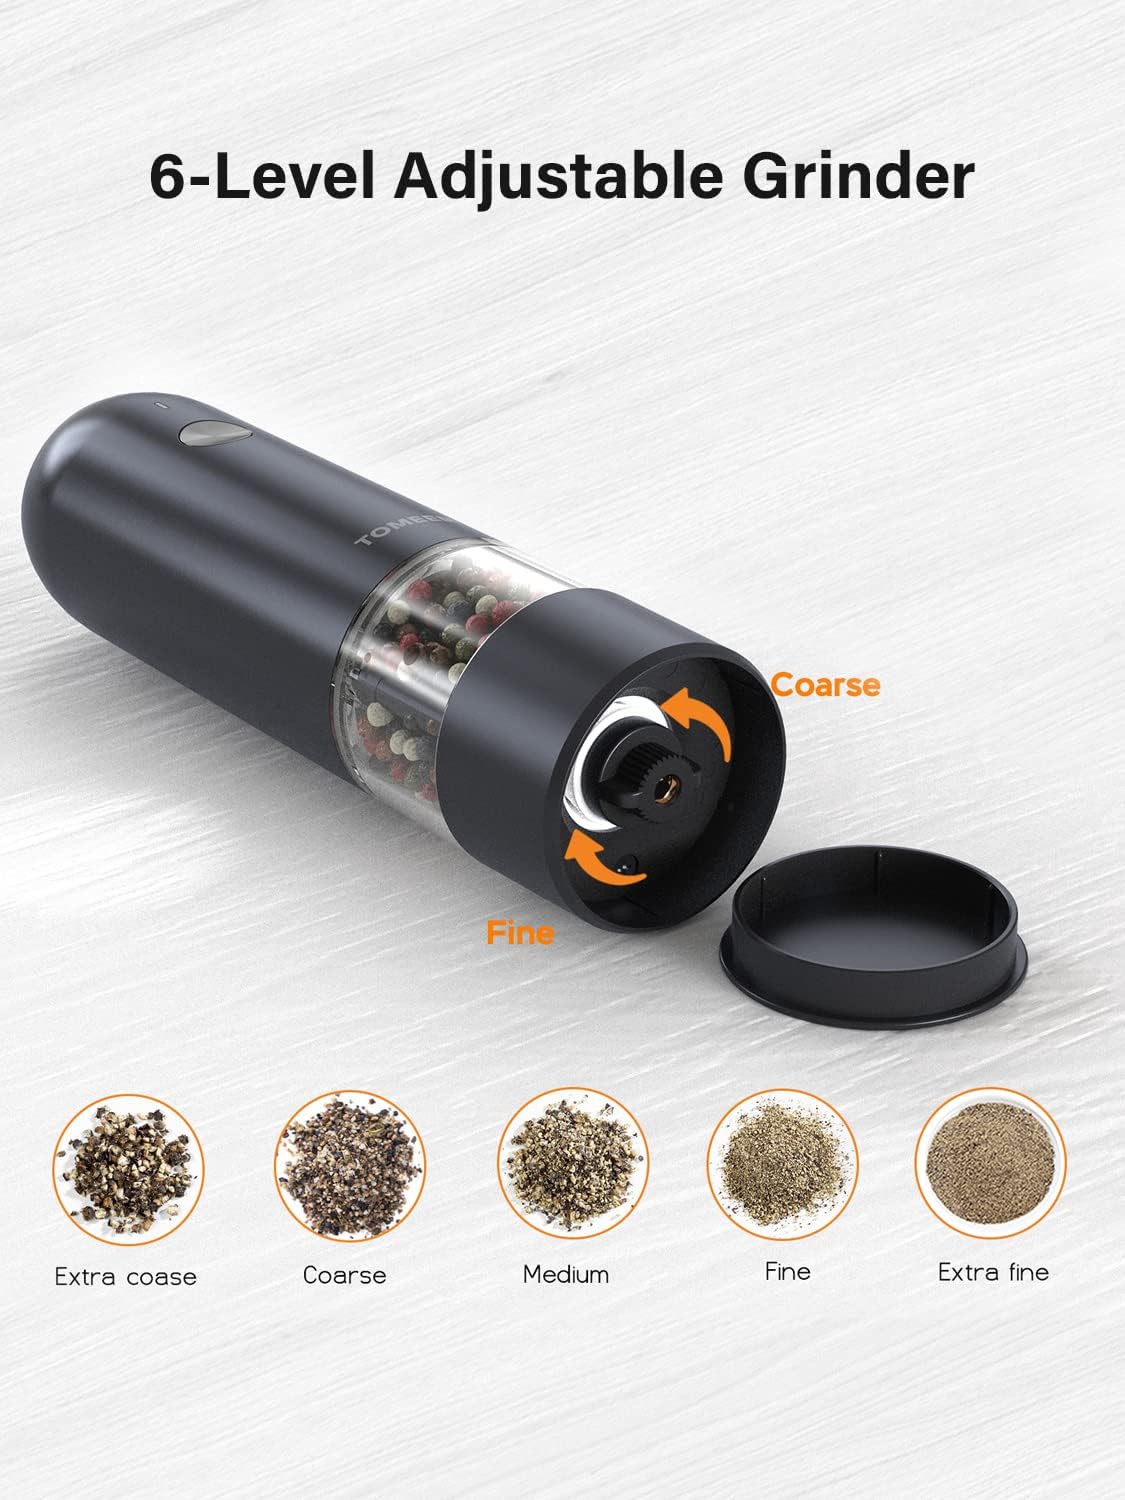 Electric Salt and Pepper Grinder Set - USB Rechargeable One Hand